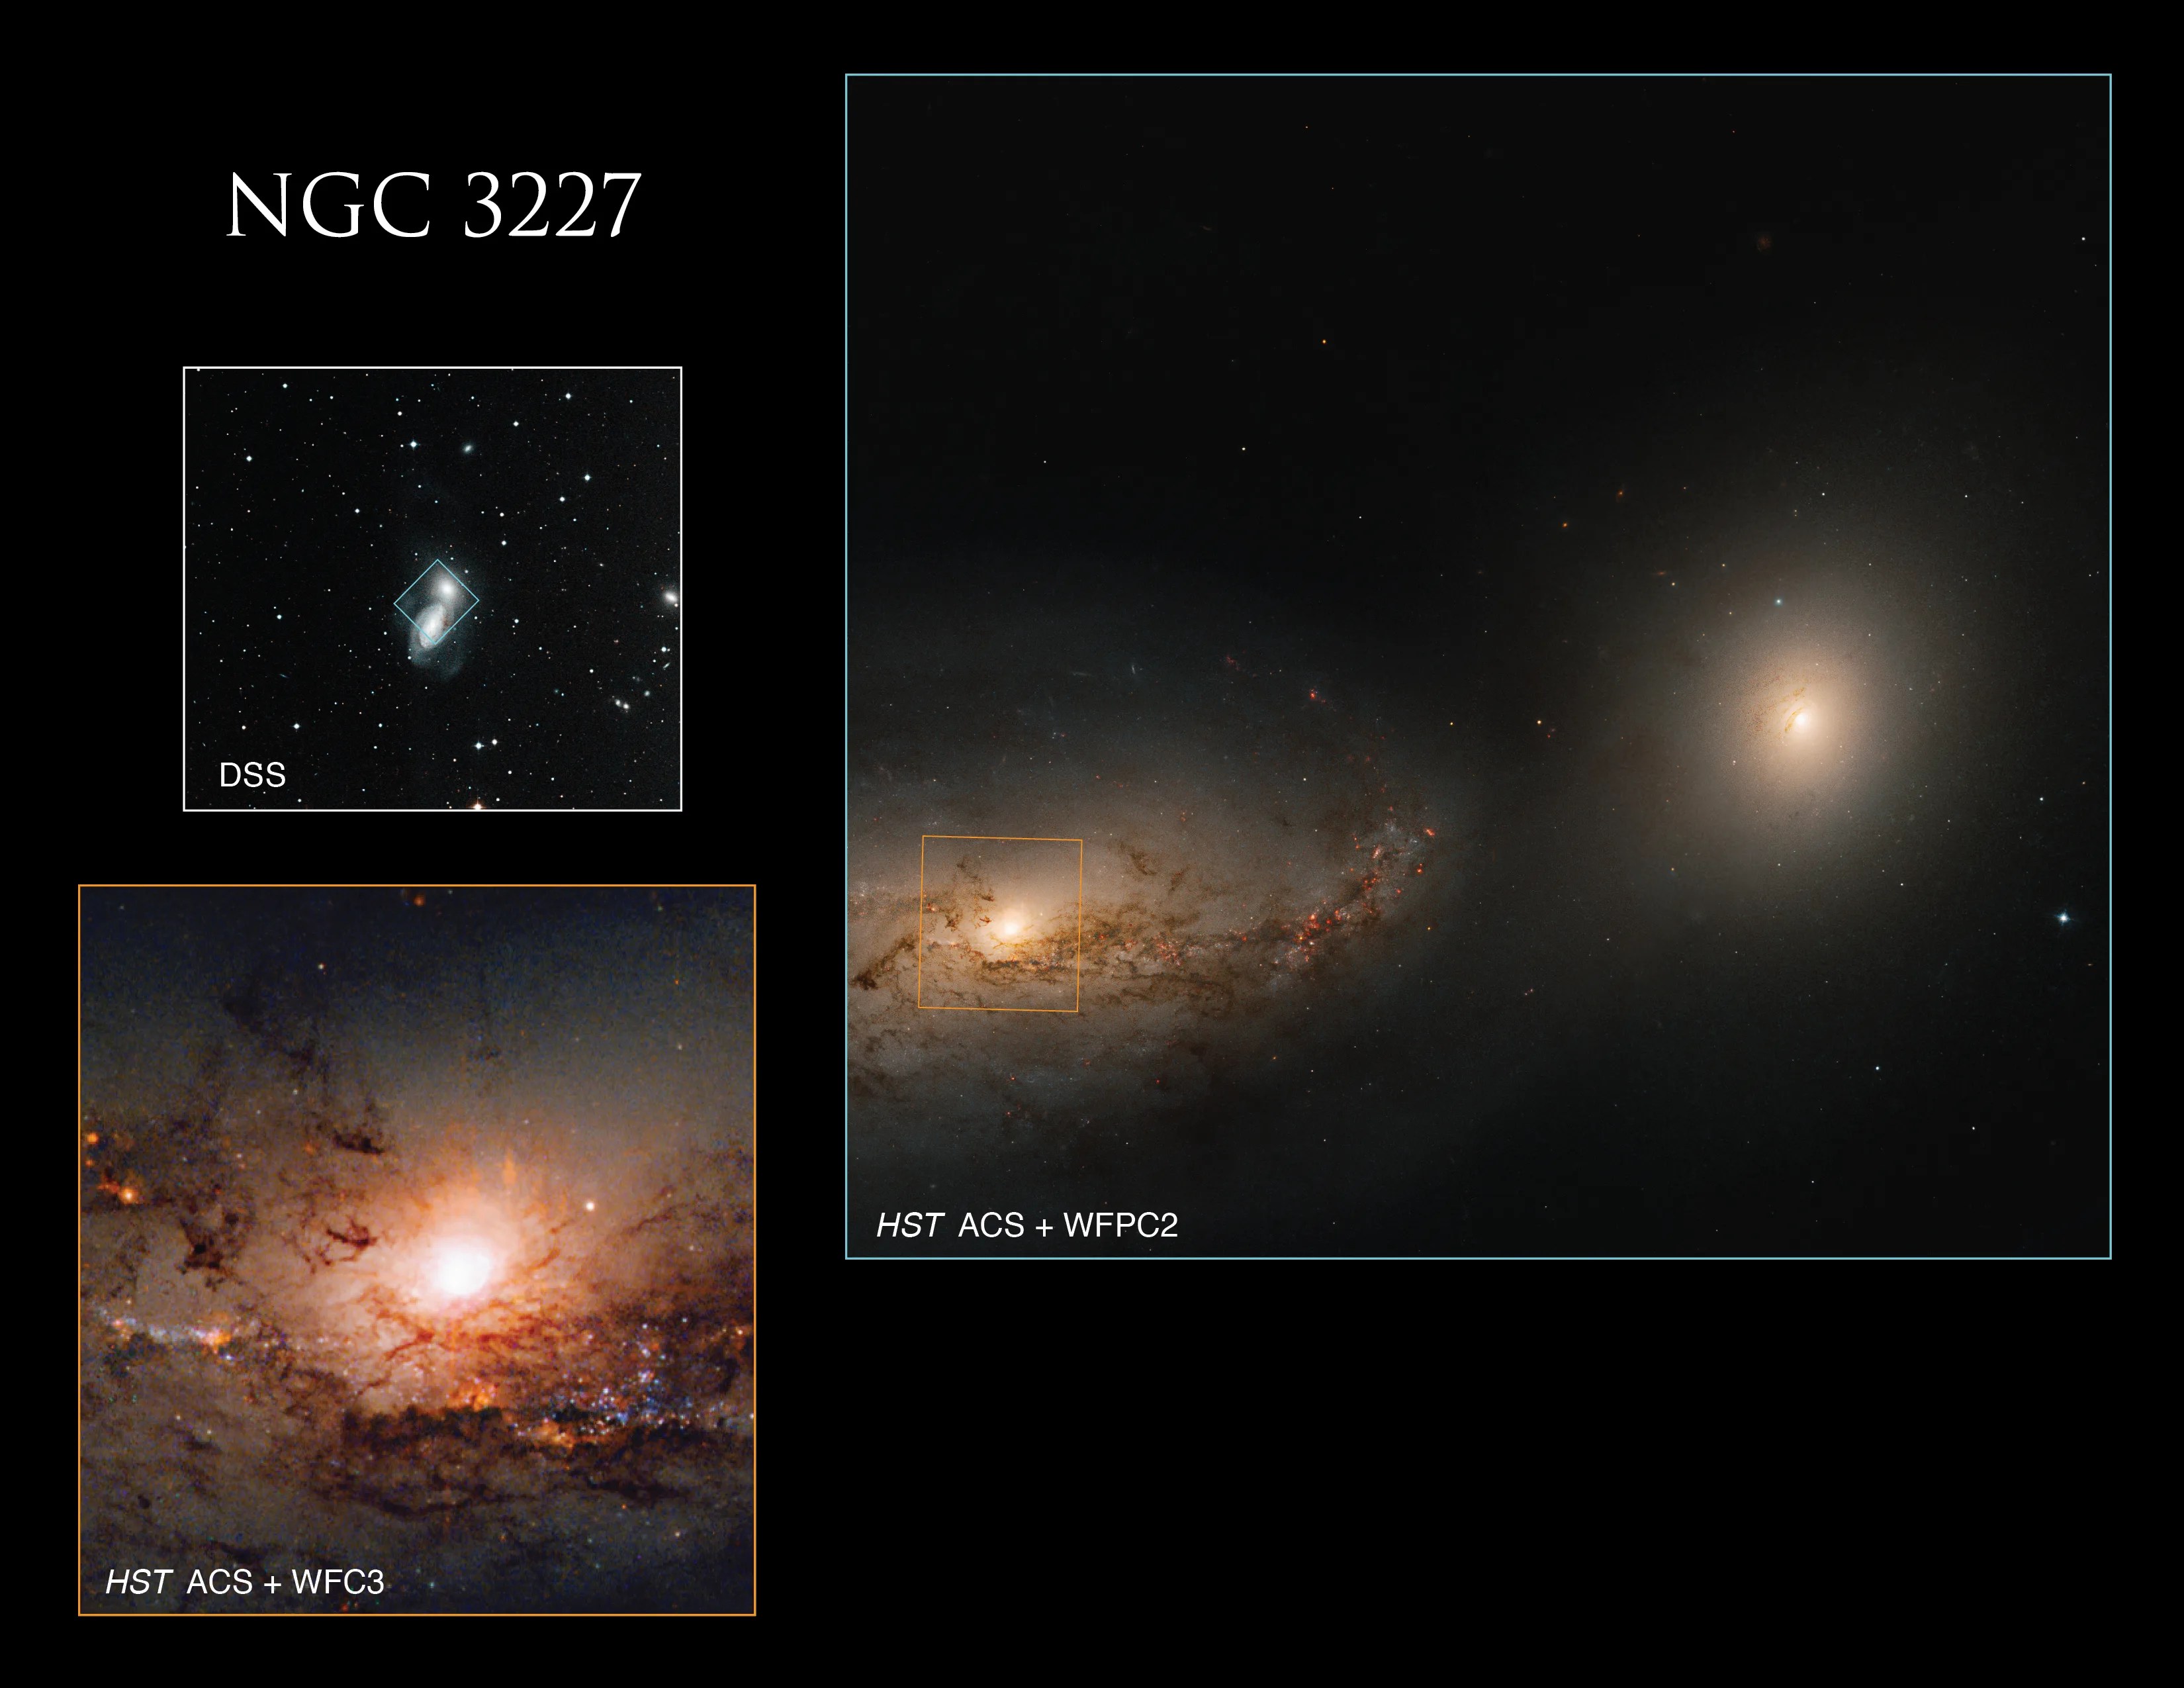 Upper left: black and white smudge of the two galaxies against a starry background. Lower left: swirls of reddish-brown/black dust encircle a bright white core. Reddish-white star forming regions, a few blue stars. Right side: main Hubble image